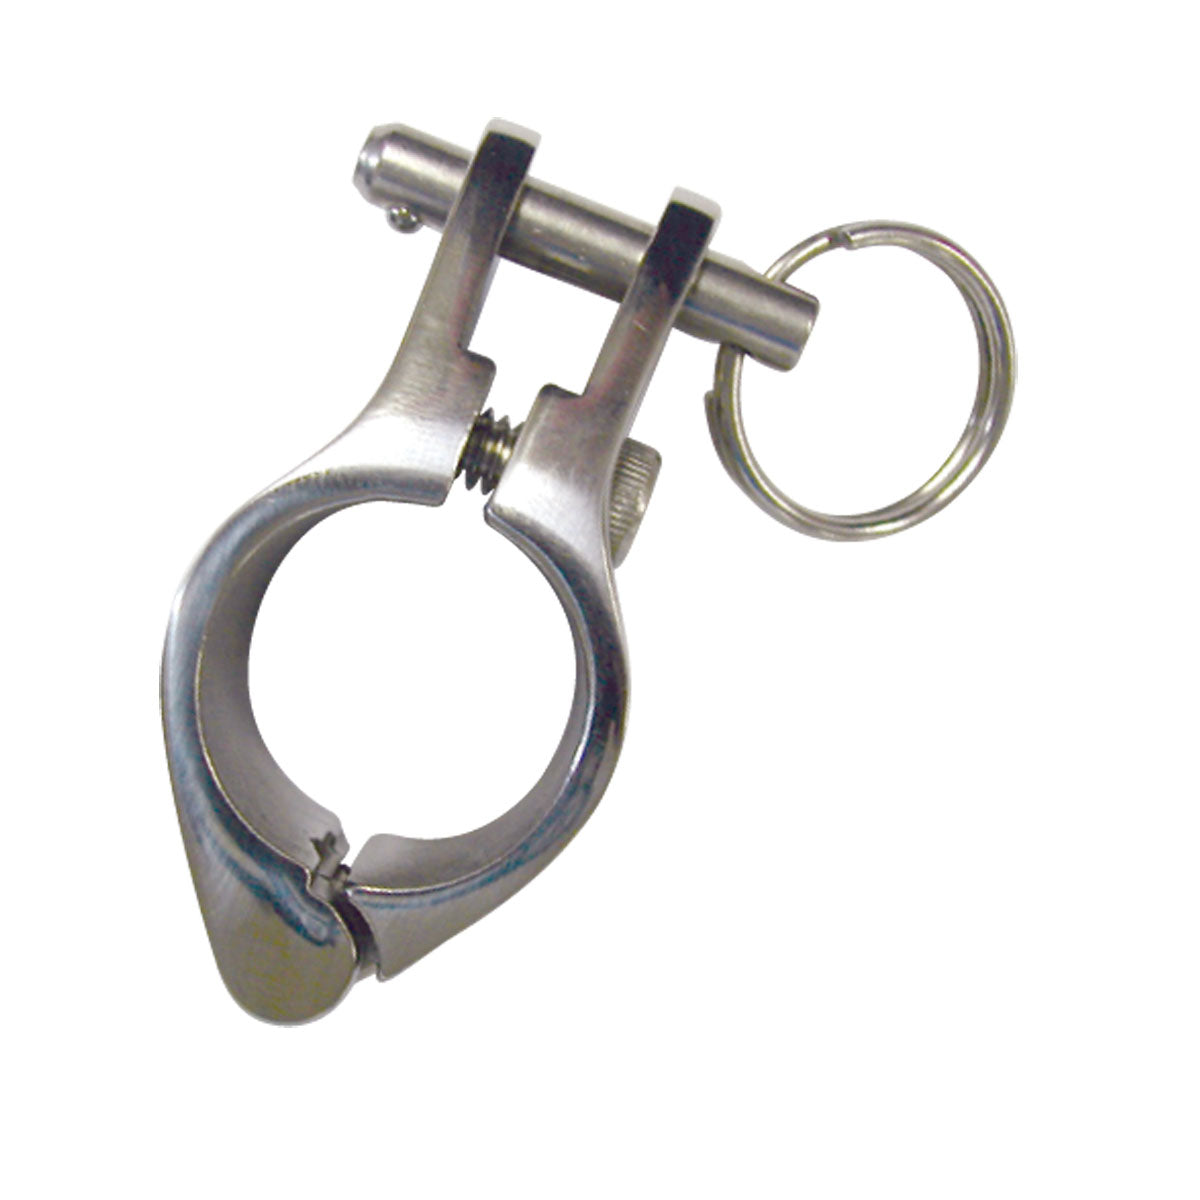 Canopy Bow Knuckles – Stainless Steel Split Open